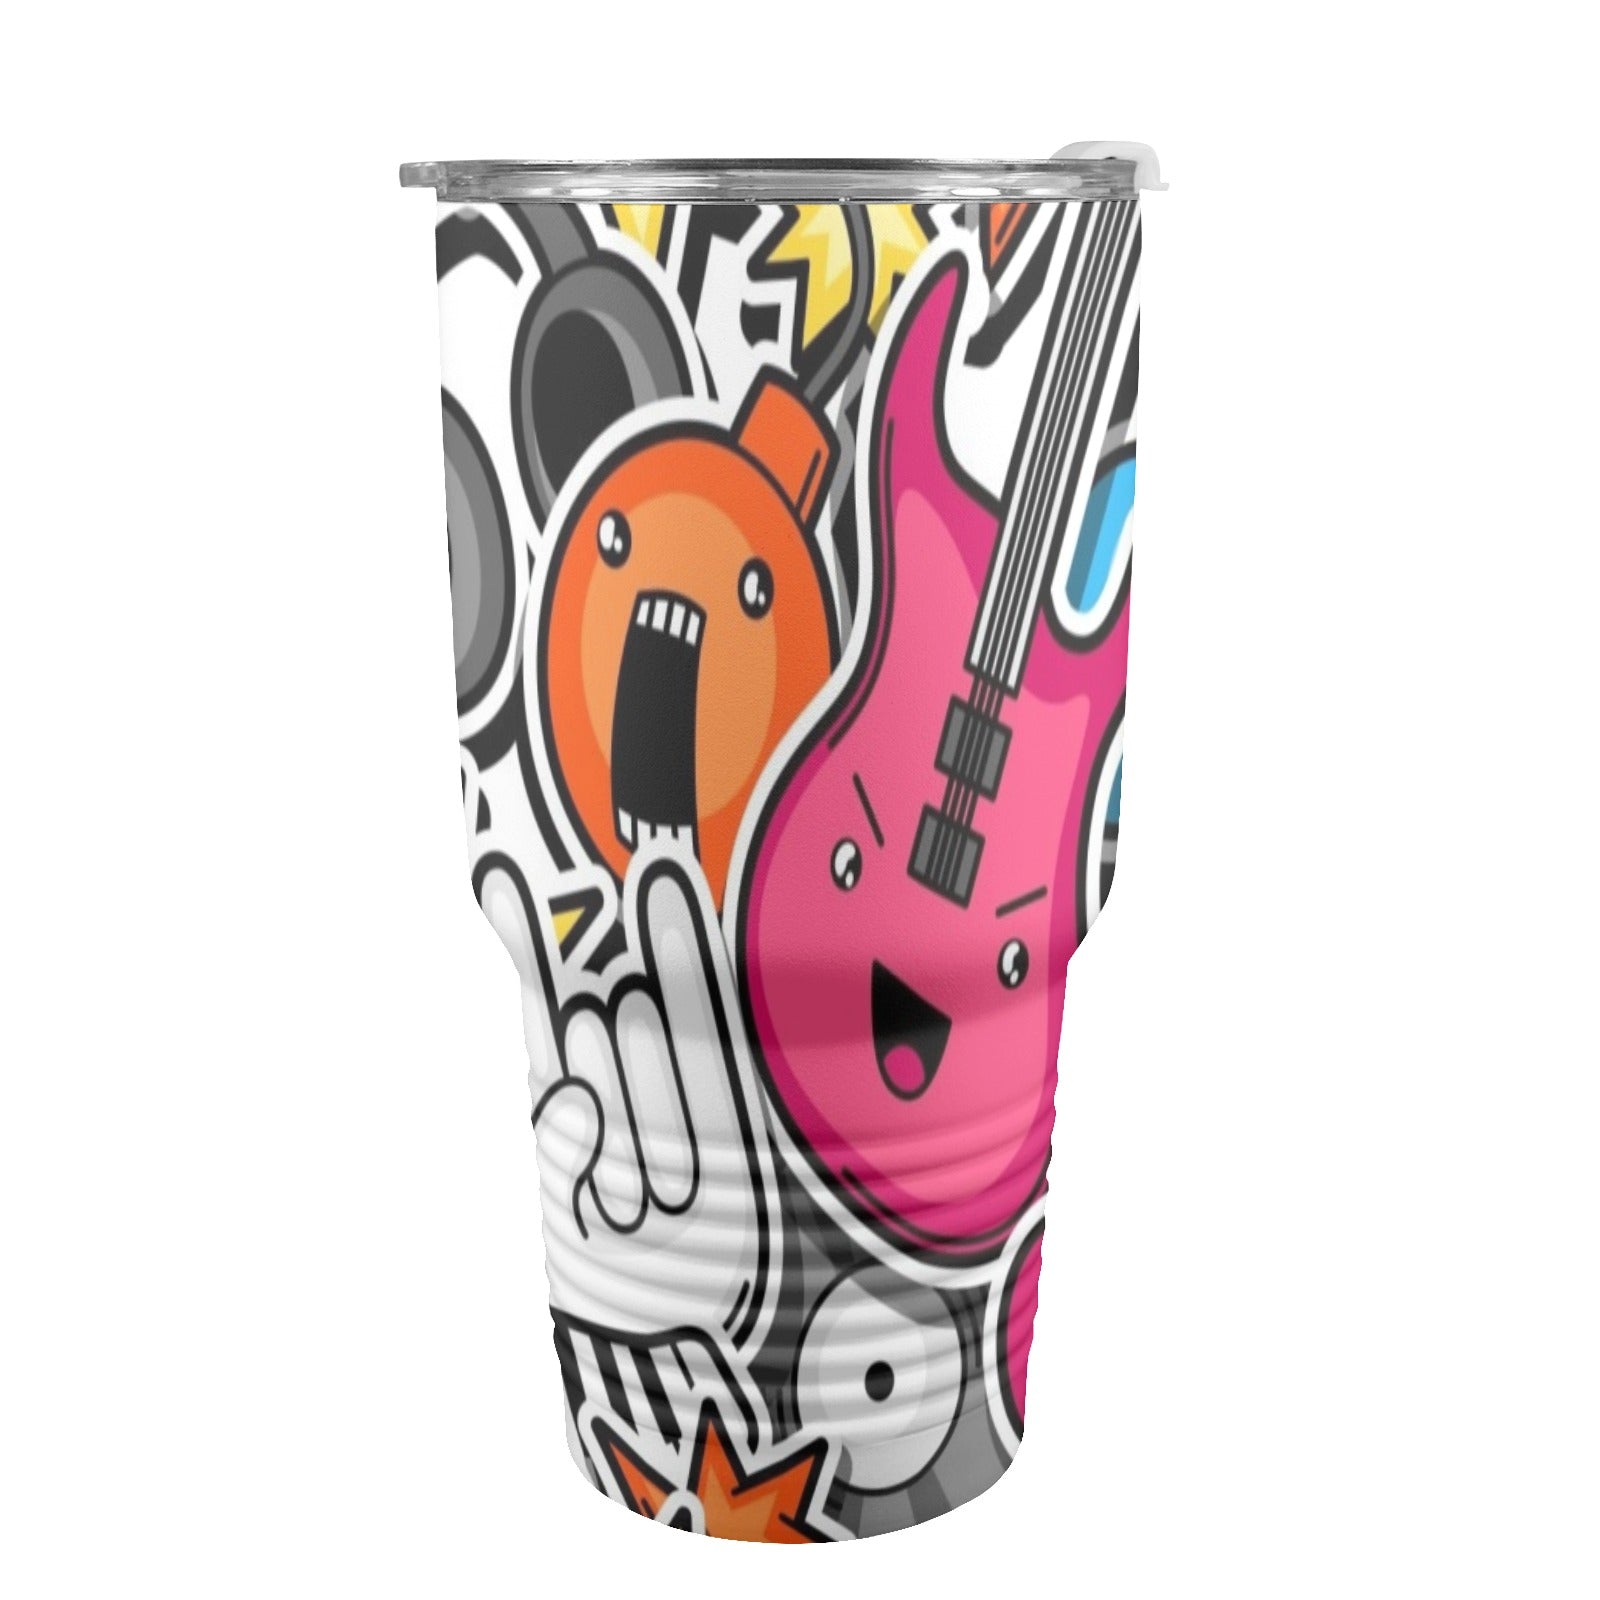 Sticker Music - 30oz Insulated Stainless Steel Mobile Tumbler 30oz Insulated Stainless Steel Mobile Tumbler Music